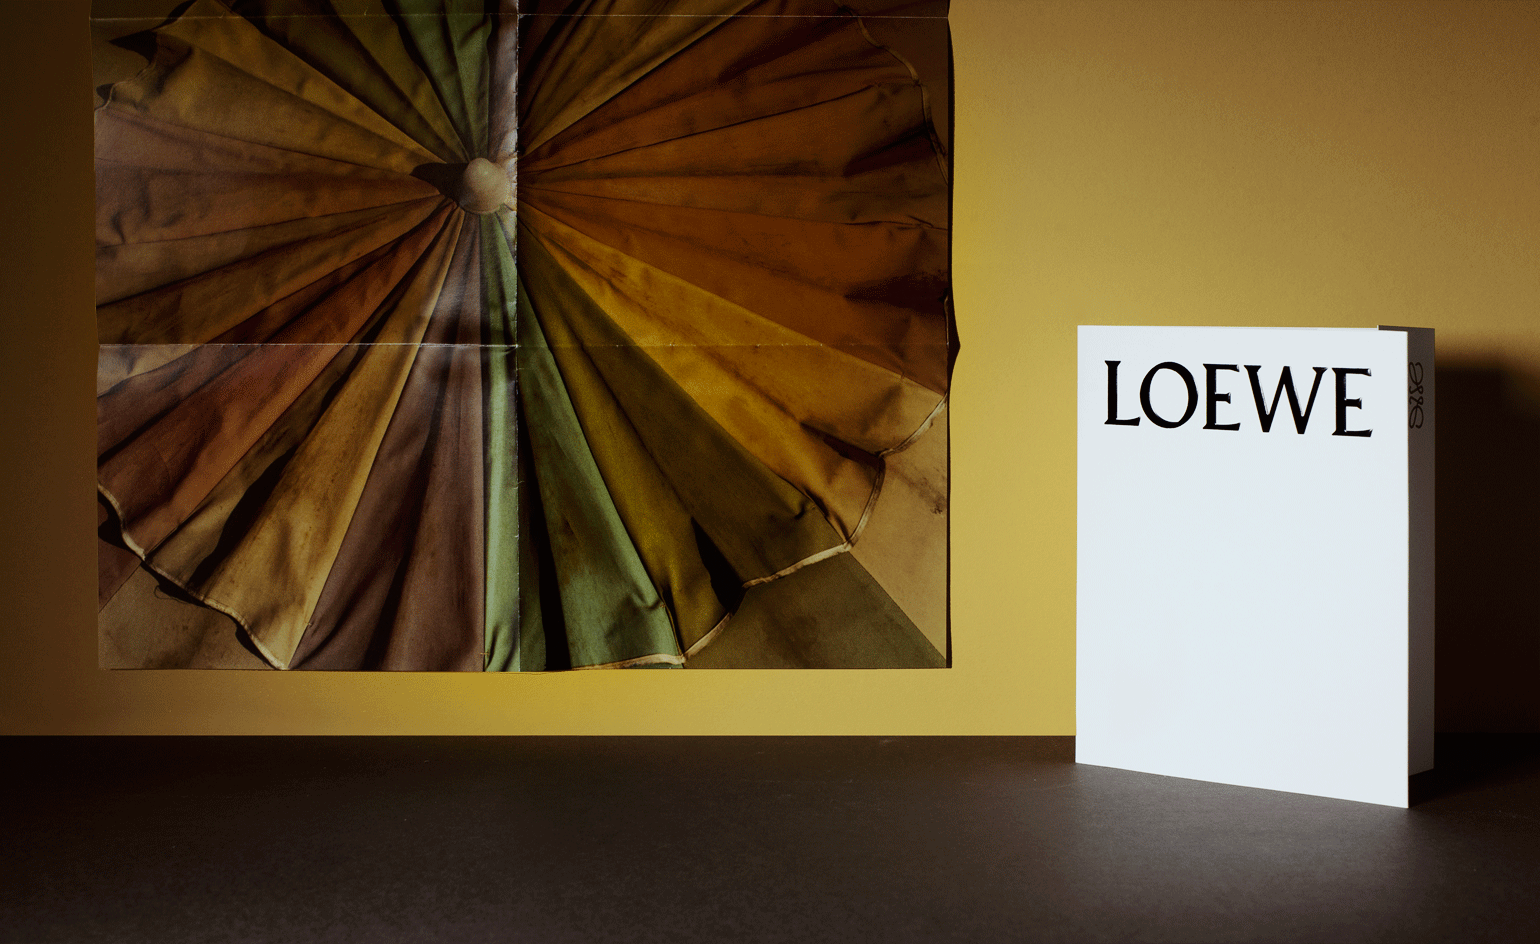 A large debossed logo on a crisp white gate-folded card accompanied a poster of an aged beach umbrella from Loewe